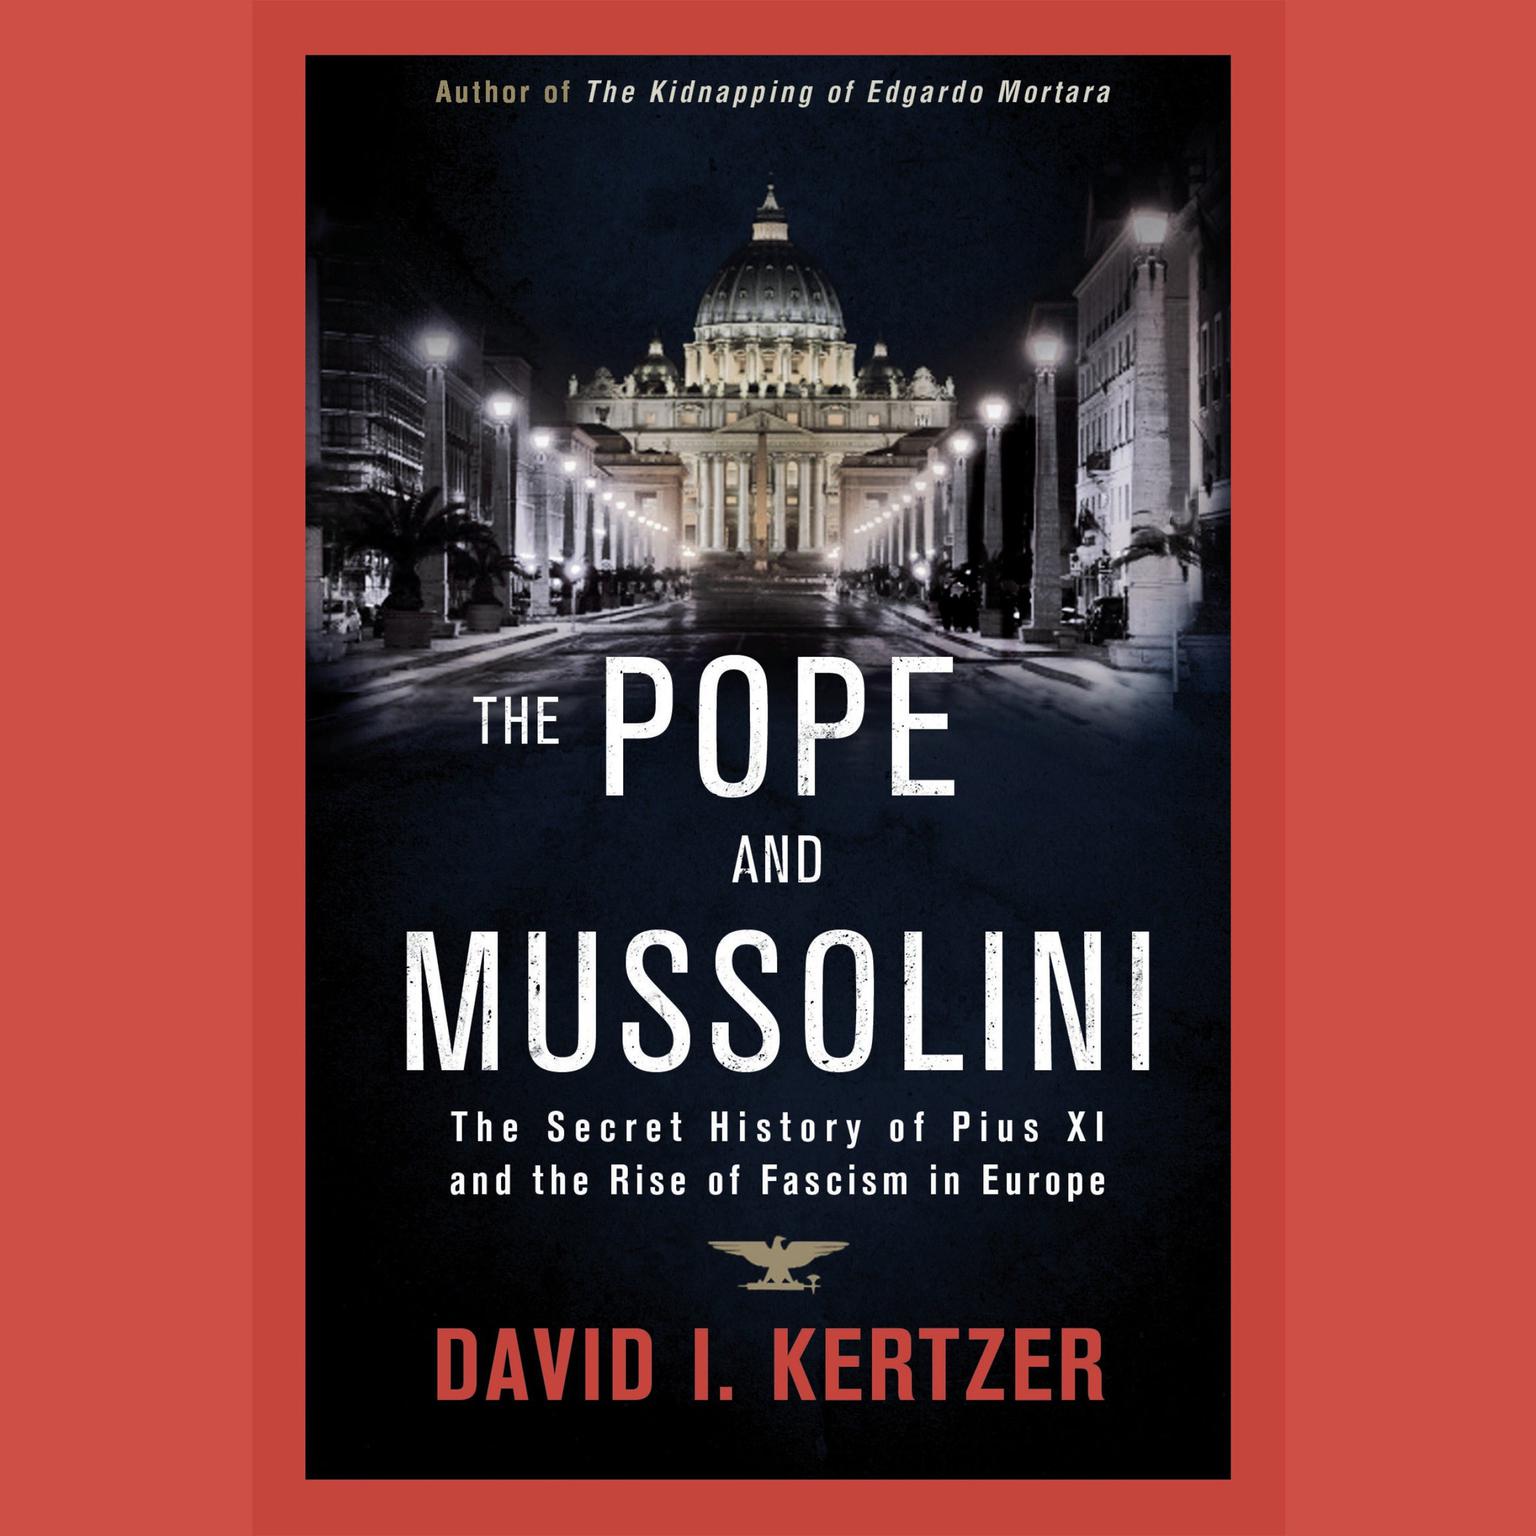 The Pope and Mussolini: The Secret History of Pius XI and the Rise of Fascism in Europe Audiobook, by David I. Kertzer